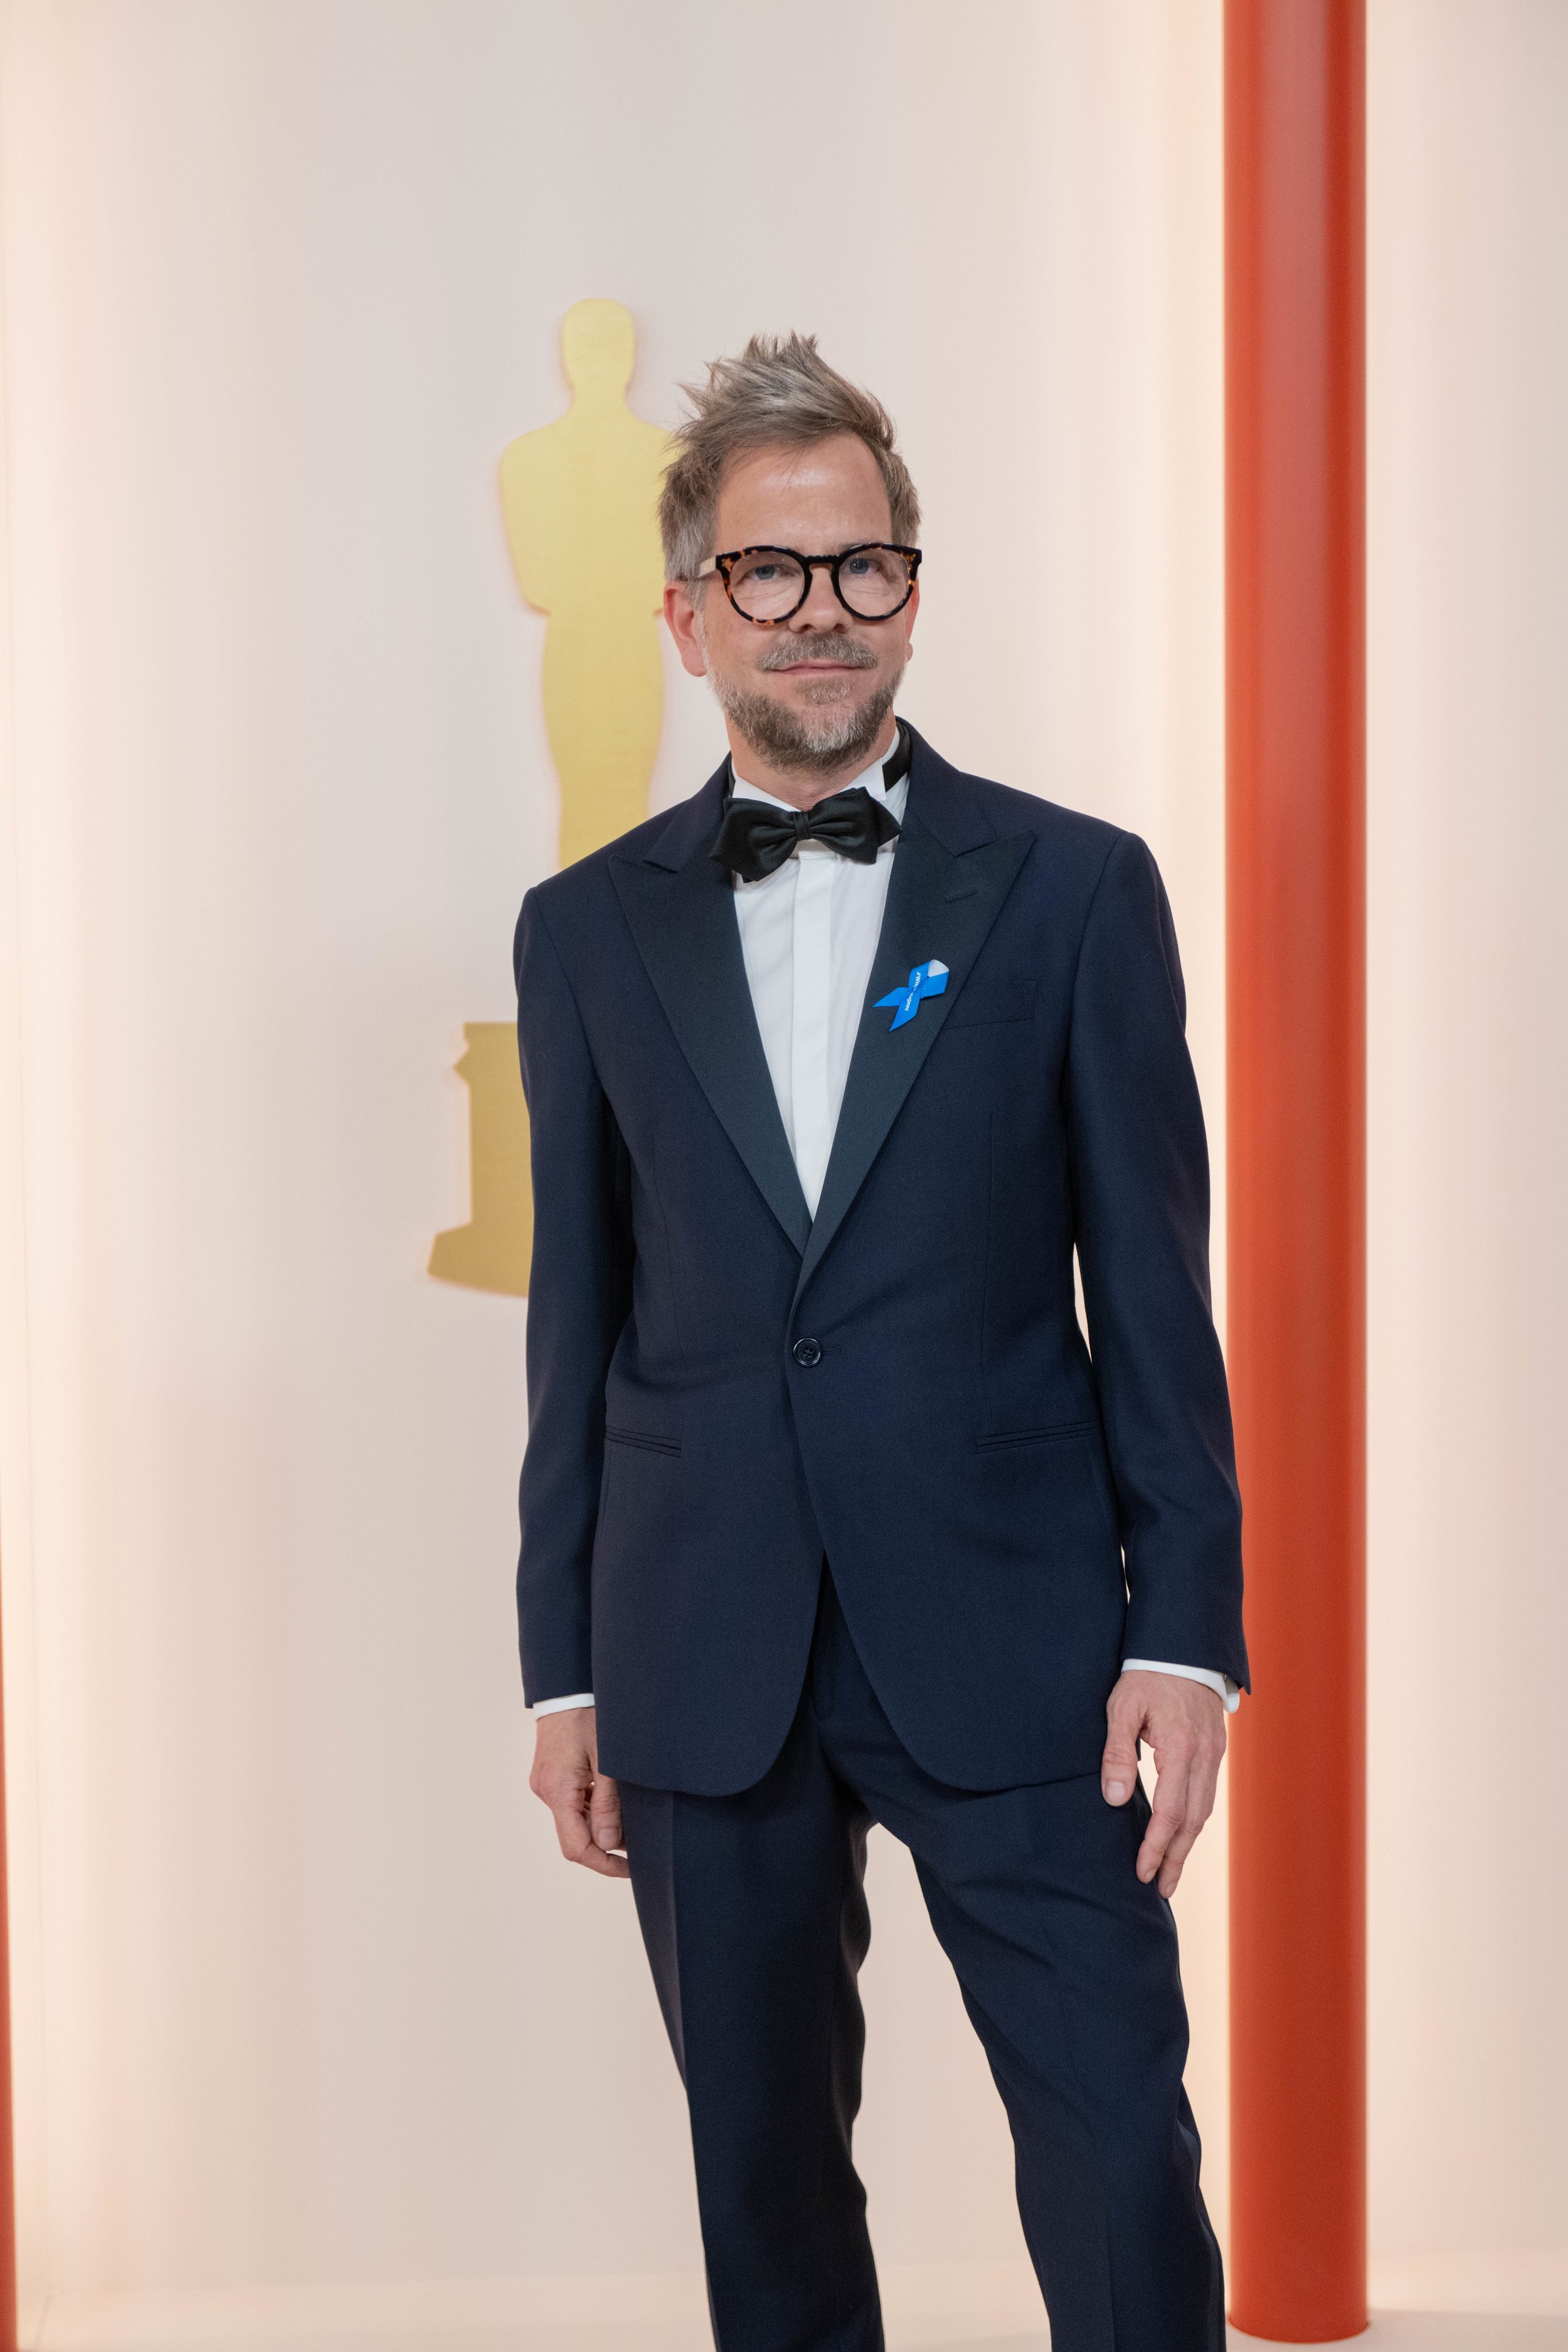 Oscar® nominee Christian M. Goldbeck arrives on the red carpet of the 95th Oscars